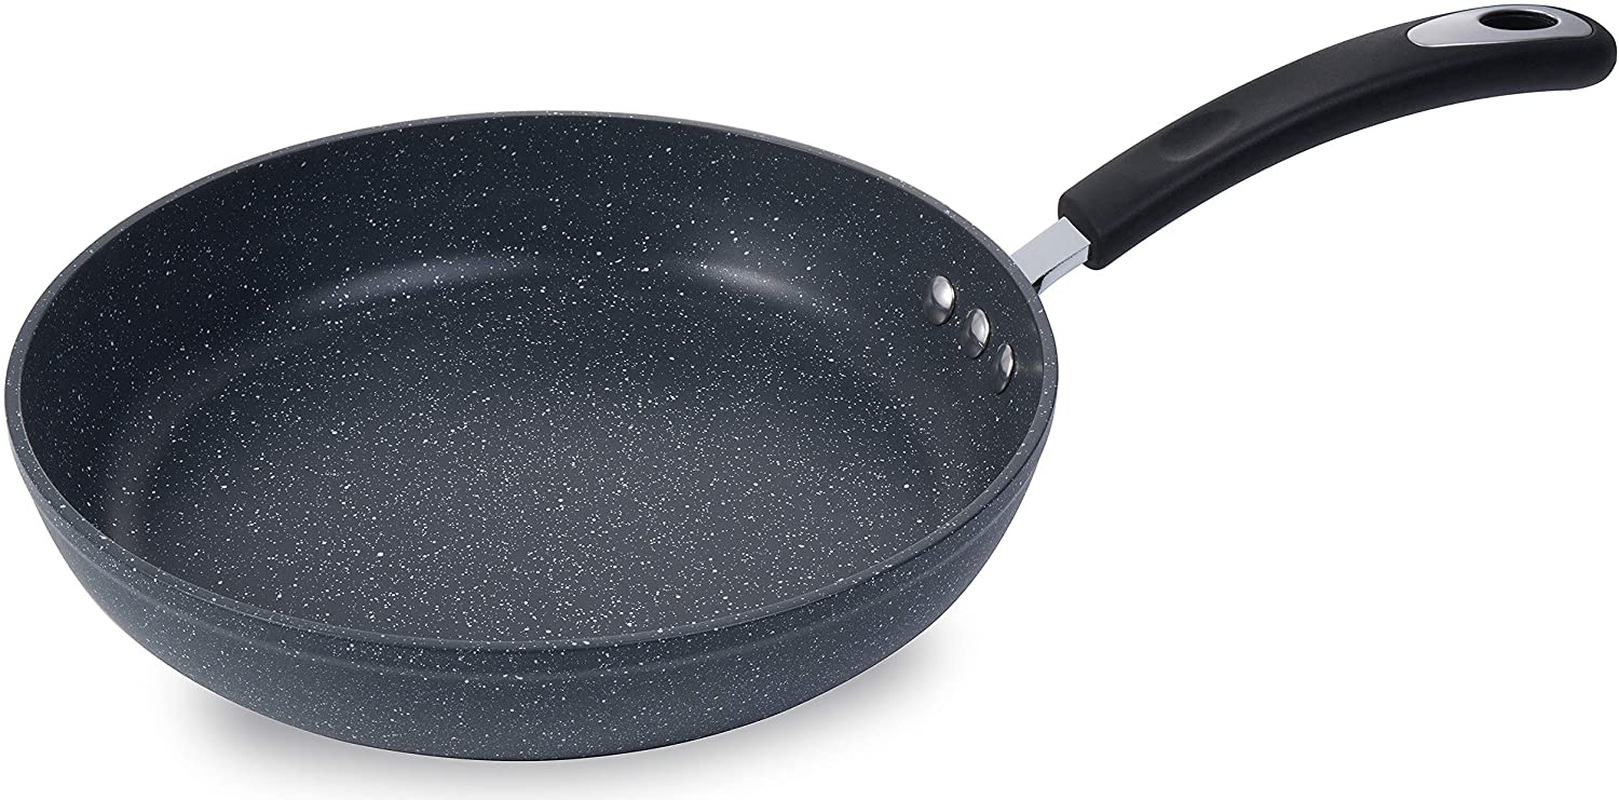 12" Stone Earth Frying Pan by Ozeri, with 100% APEO & PFOA-Free Stone-Derived Non-Stick Coating from Germany